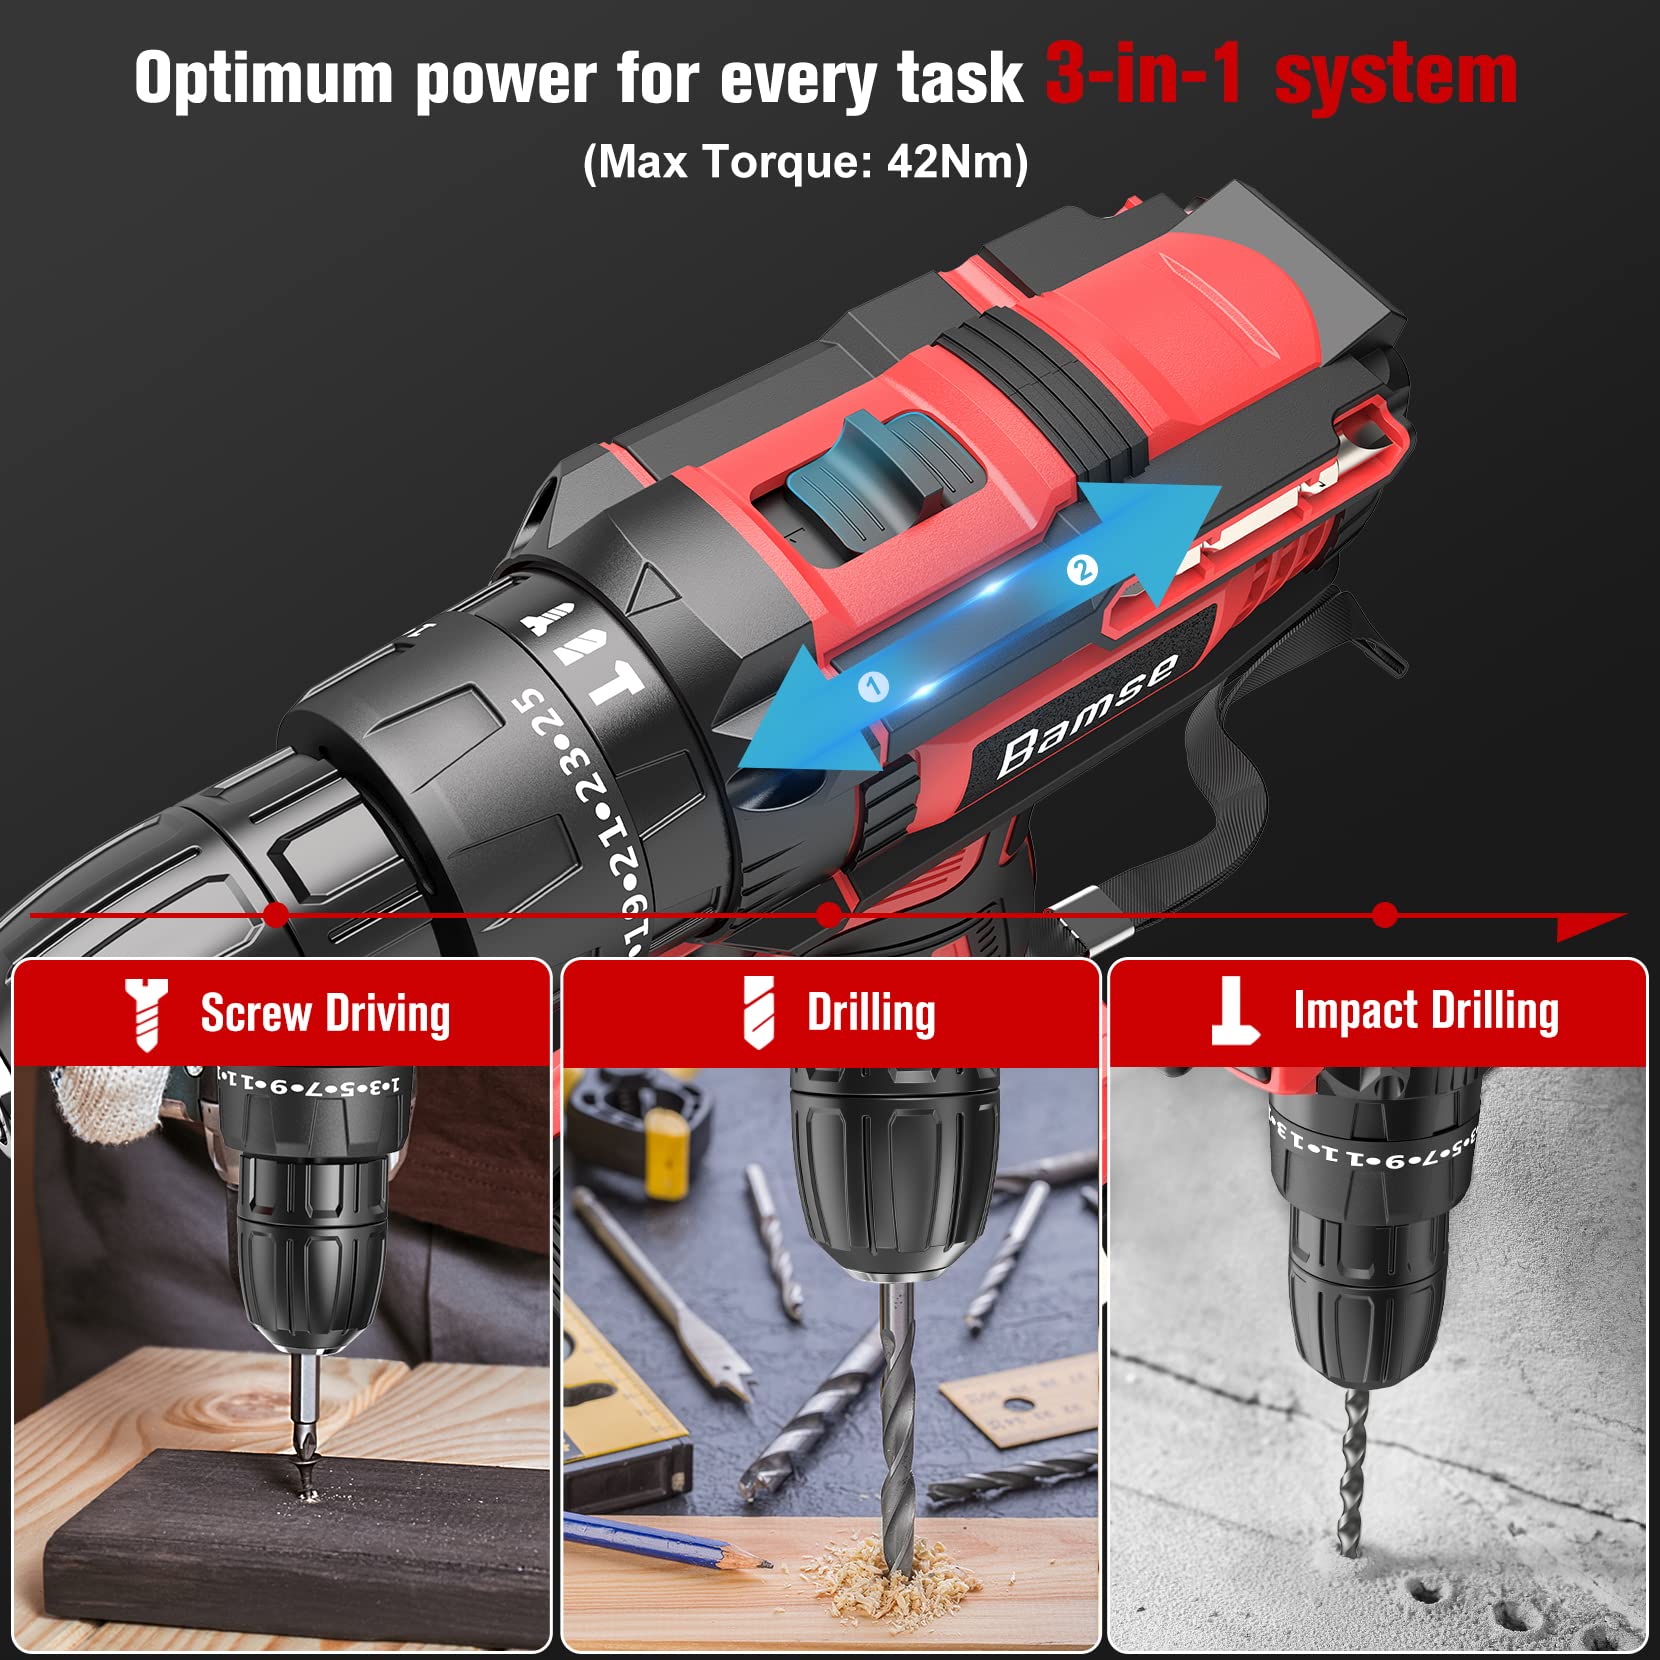 21V Cordless Drill Driver Set, Bamse Power Drill Kit with 2.0AH Battery, Hammer Drill with 372 In-lbs Max, 25+3 Position, 2 Variable Speed, 3/8'' Keyless Chuck, Fast Charger and 23PCS Accessories